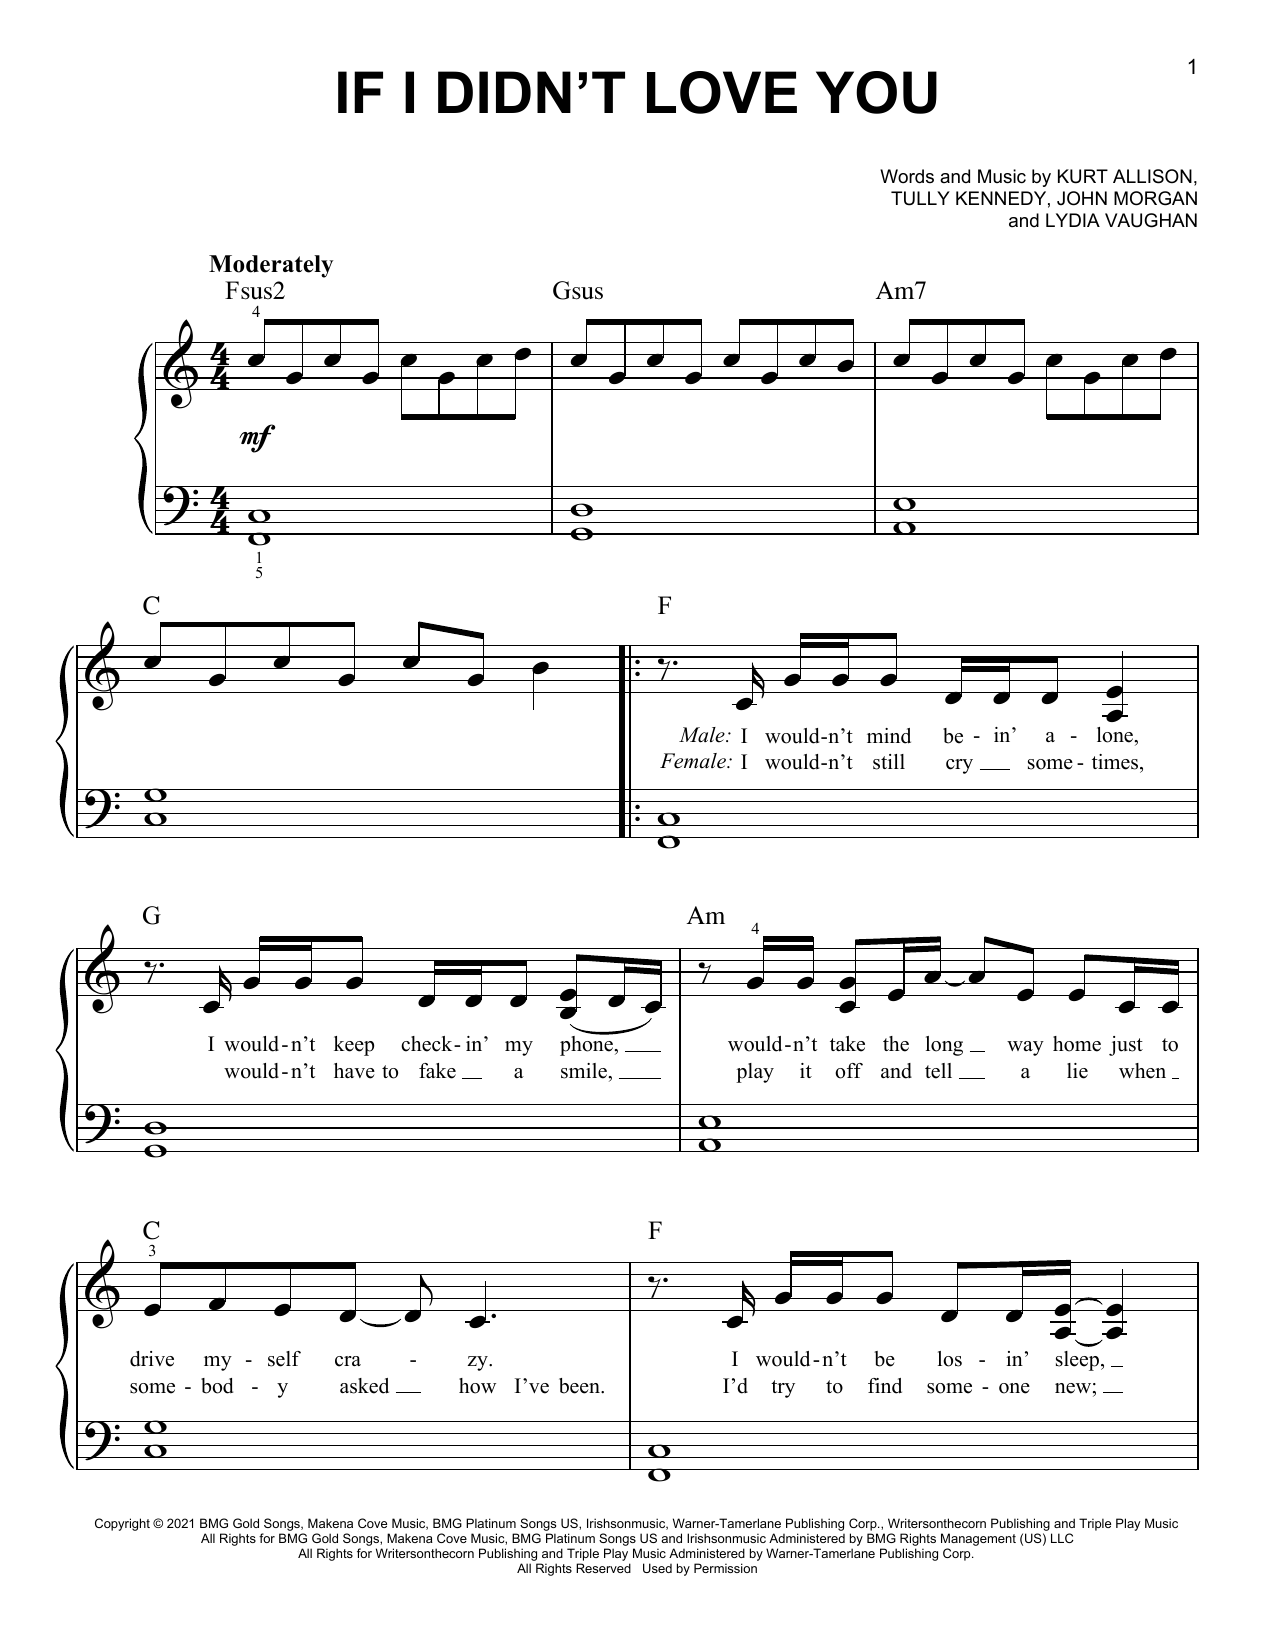 Download Jason Aldean & Carrie Underwood If I Didn't Love You Sheet Music